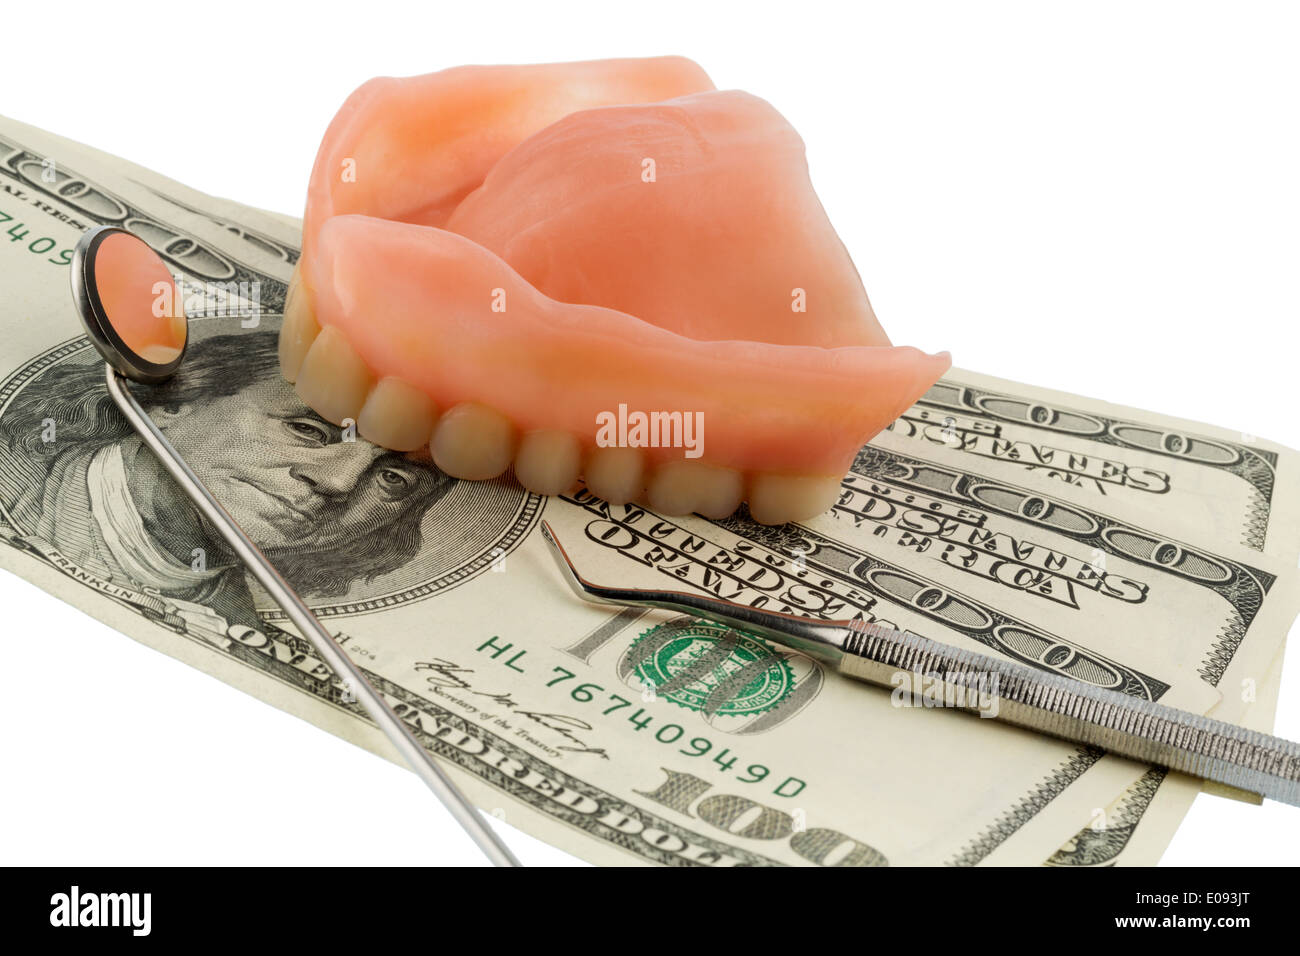 Set of teeth and dollar notes, symbolic photo fue set of dentures, medical costs and additional payment, Gebiss und Dollarschein Stock Photo